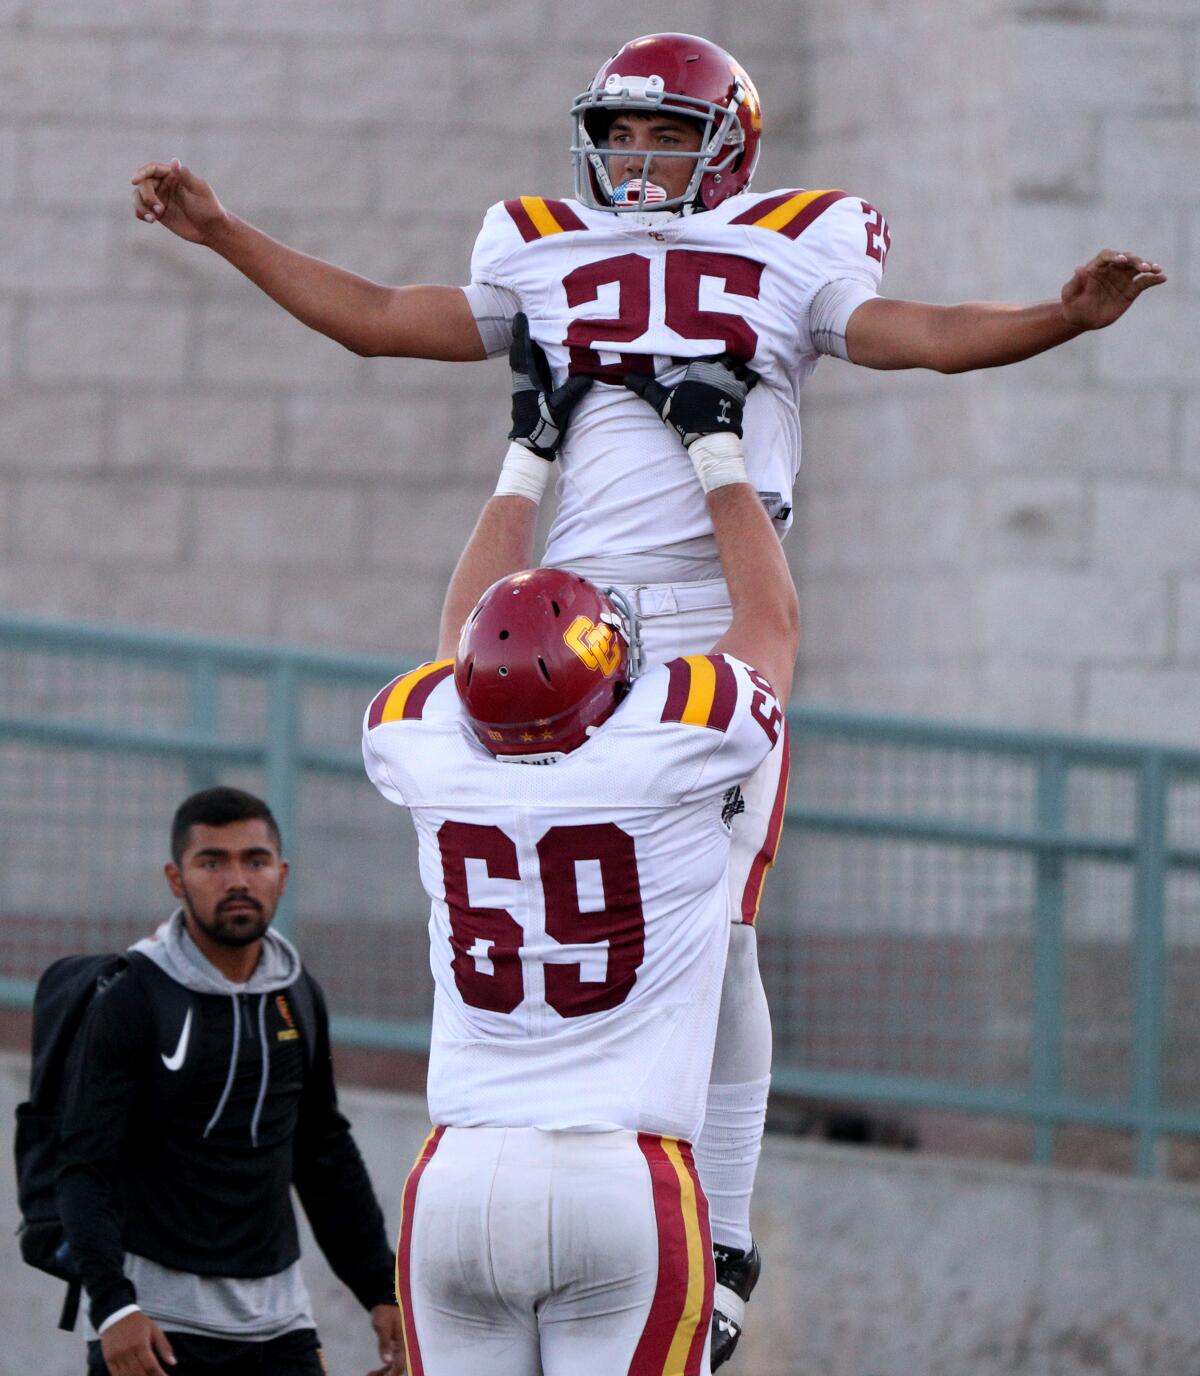 Glendale College running back Elijah Washington is lifted by Hayden Dinger after scoring a touch-down, in away game at Robinson Stadium, at Pasadena City College in Pasadena on Saturday, Sept. 14, 2019.